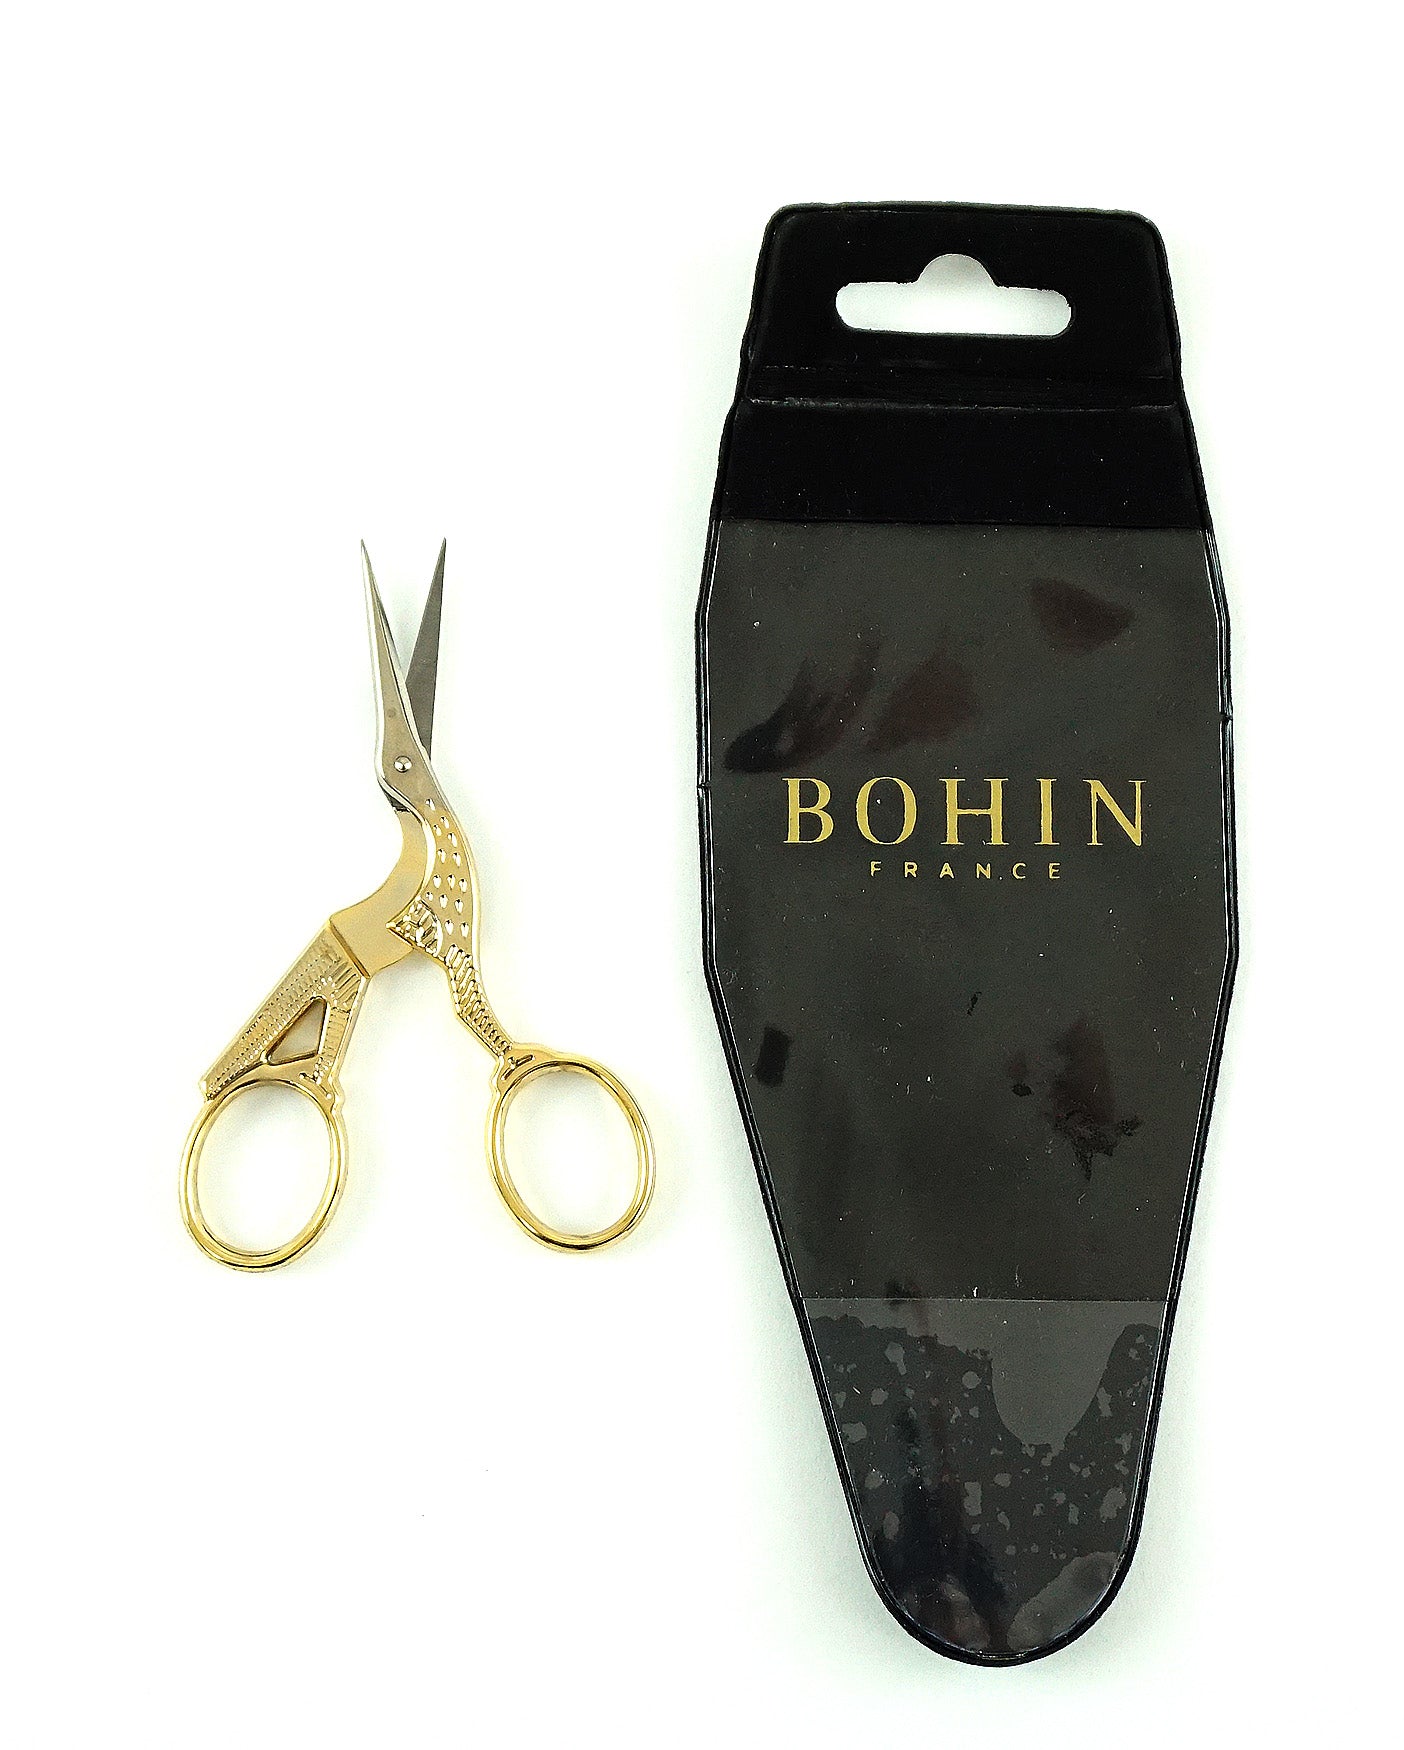 SCISSORS ~ Golden "Stork" French Embroidery Scissors 3.5" for Needlepoint, Embroidery, X-Stitch by Bohin